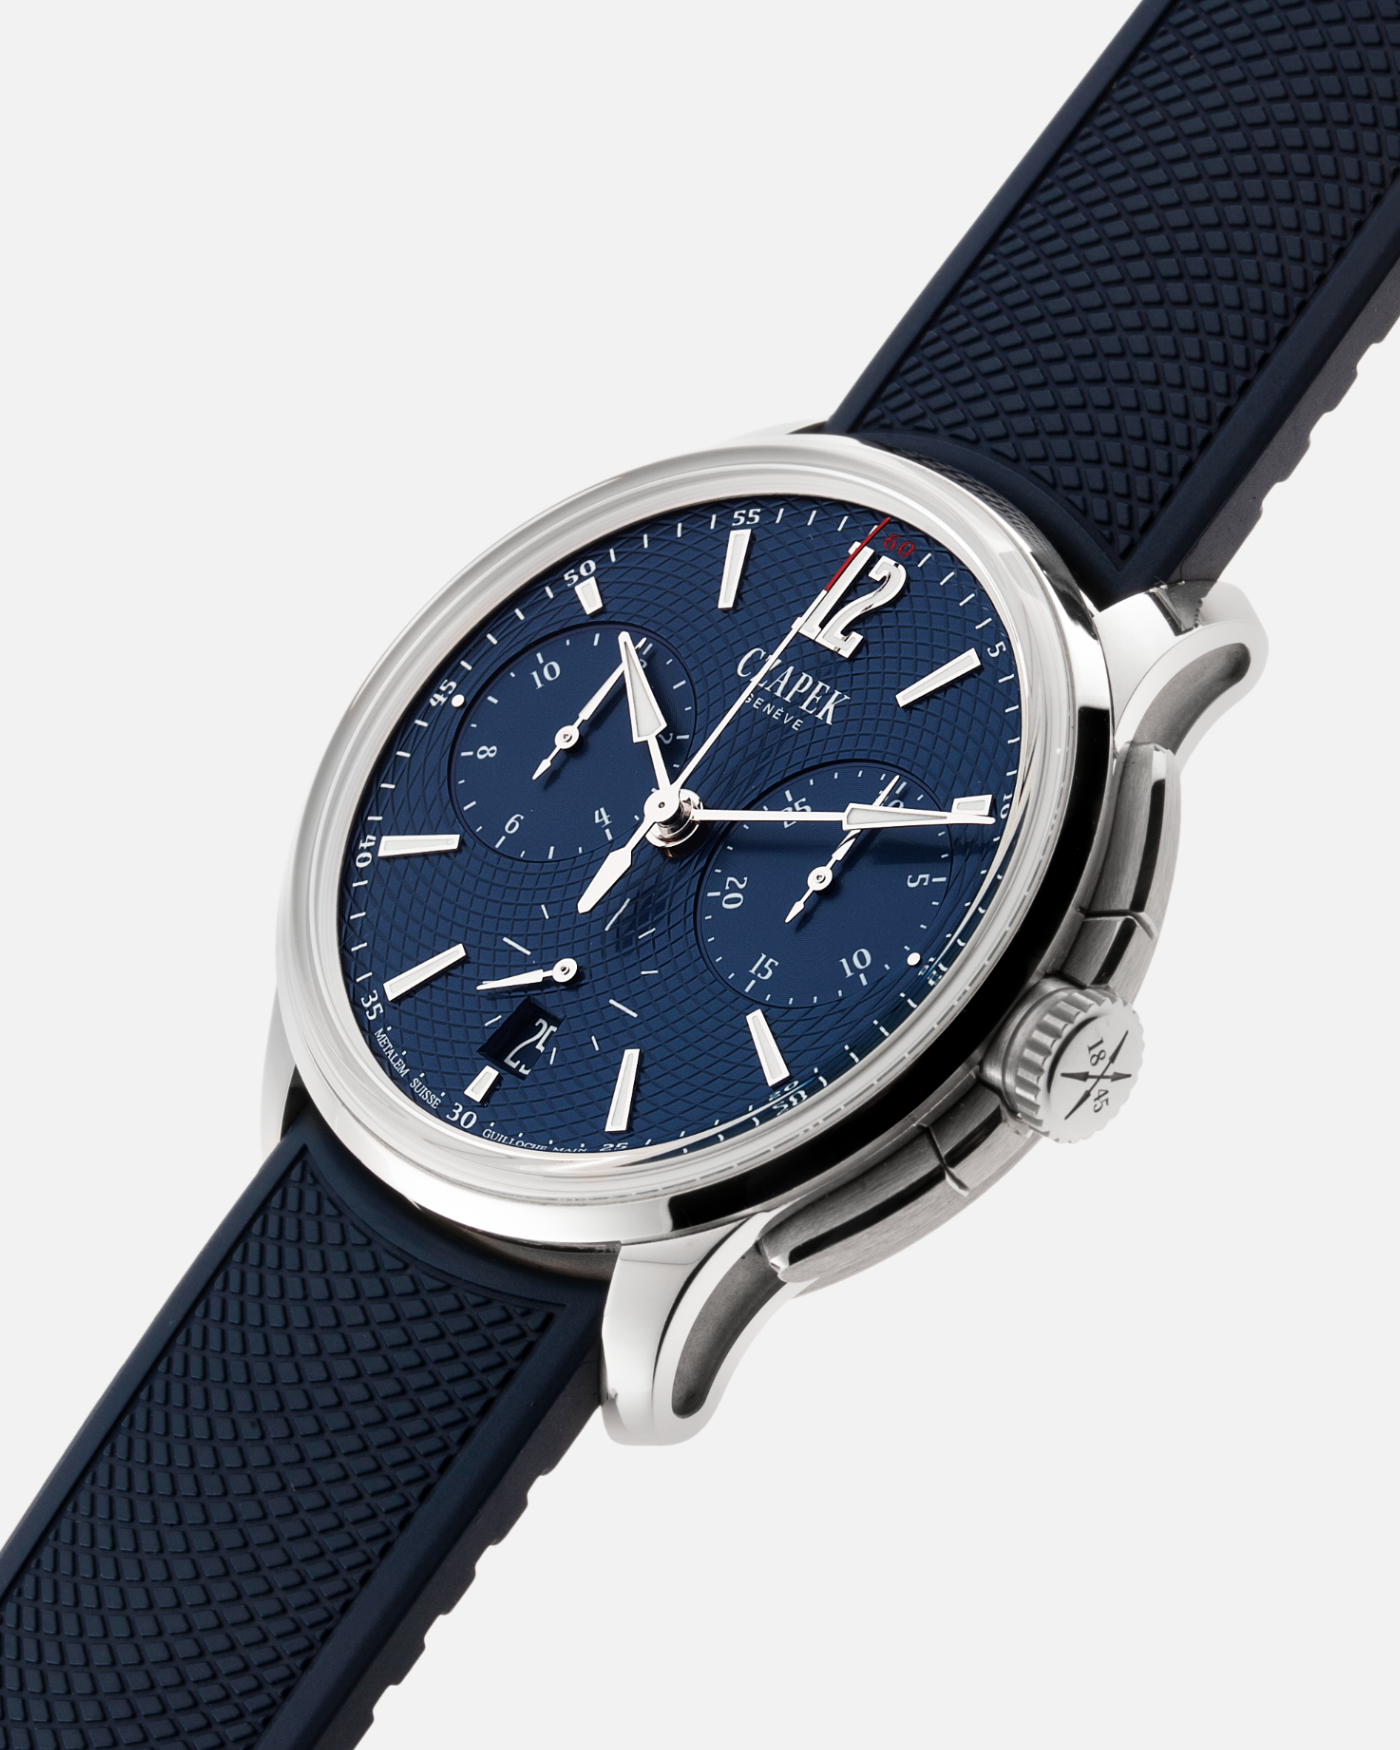 Brand: Czepek  Year: 2018 Model: Faubourg de Cracovie Chronograph L’Heuere Bleu Material: Stainless Steel Movement: Cal. SXH3 Case Diameter: 41.5mm Strap: Czapek Blue Textured Rubber Strap and Stainless Steel Deployant